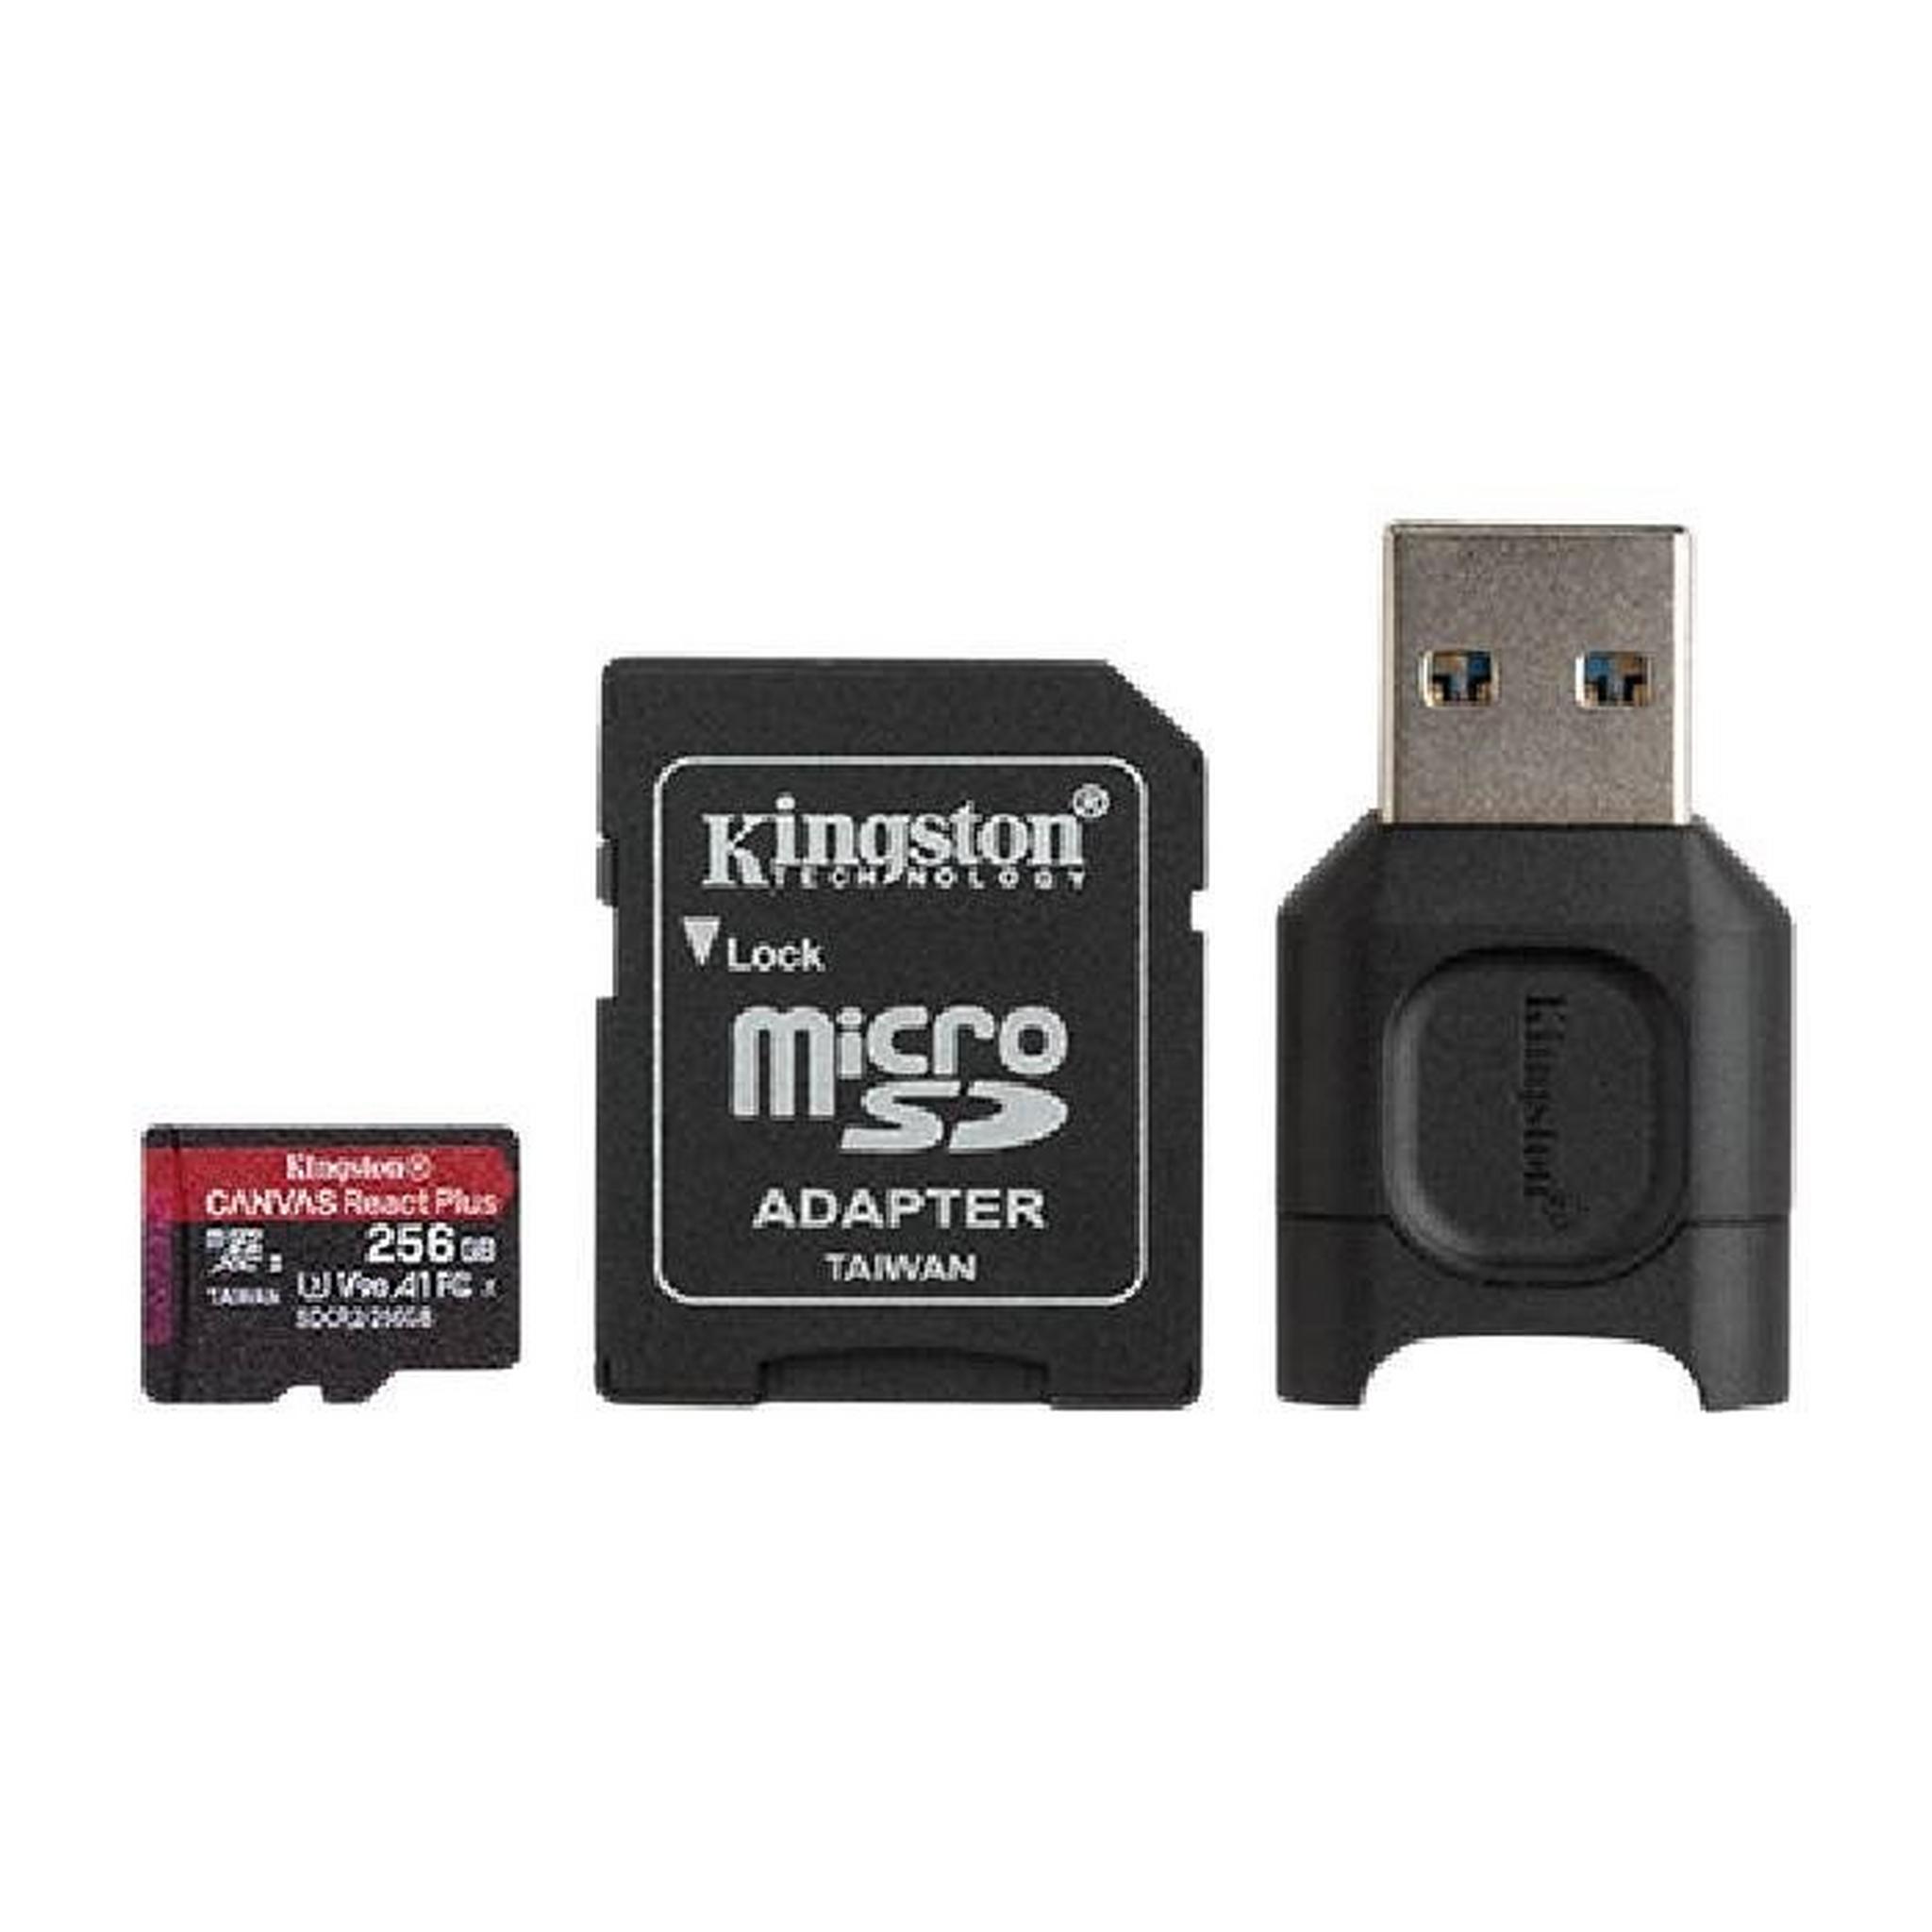 Kingston Canvas Select Plus 256GB MSDXC+SDCR2 UHS-II Memory Card + Adapter+ Reader